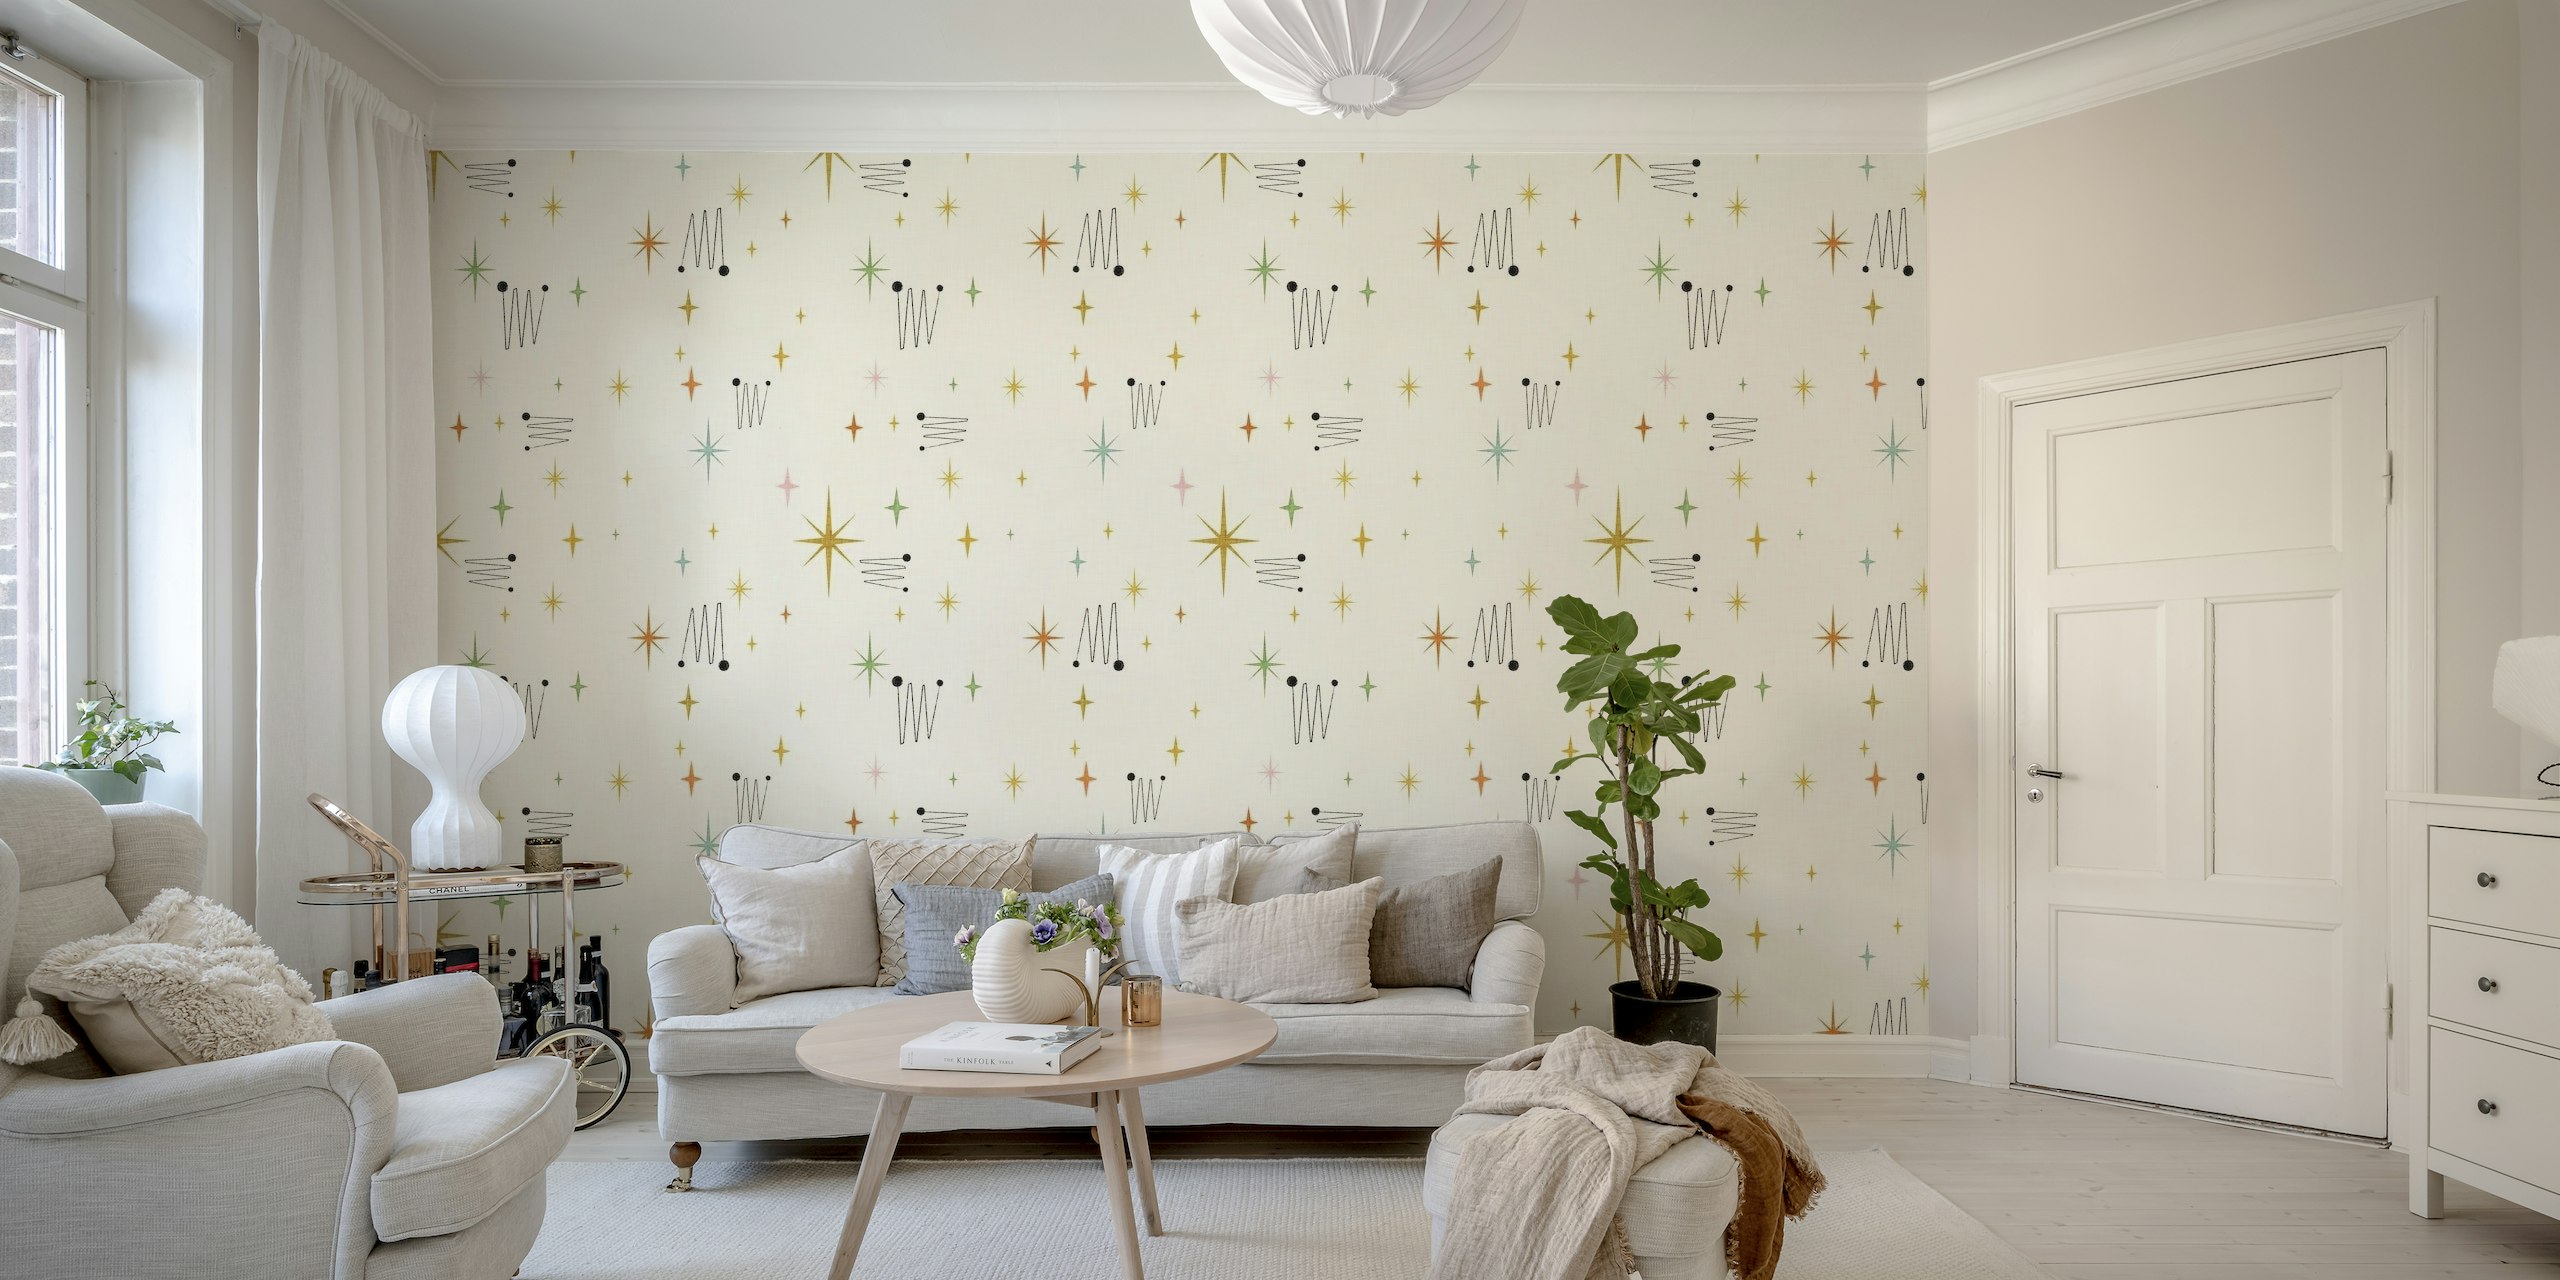 Retro-style star patterns on a warm, subtle background wall mural